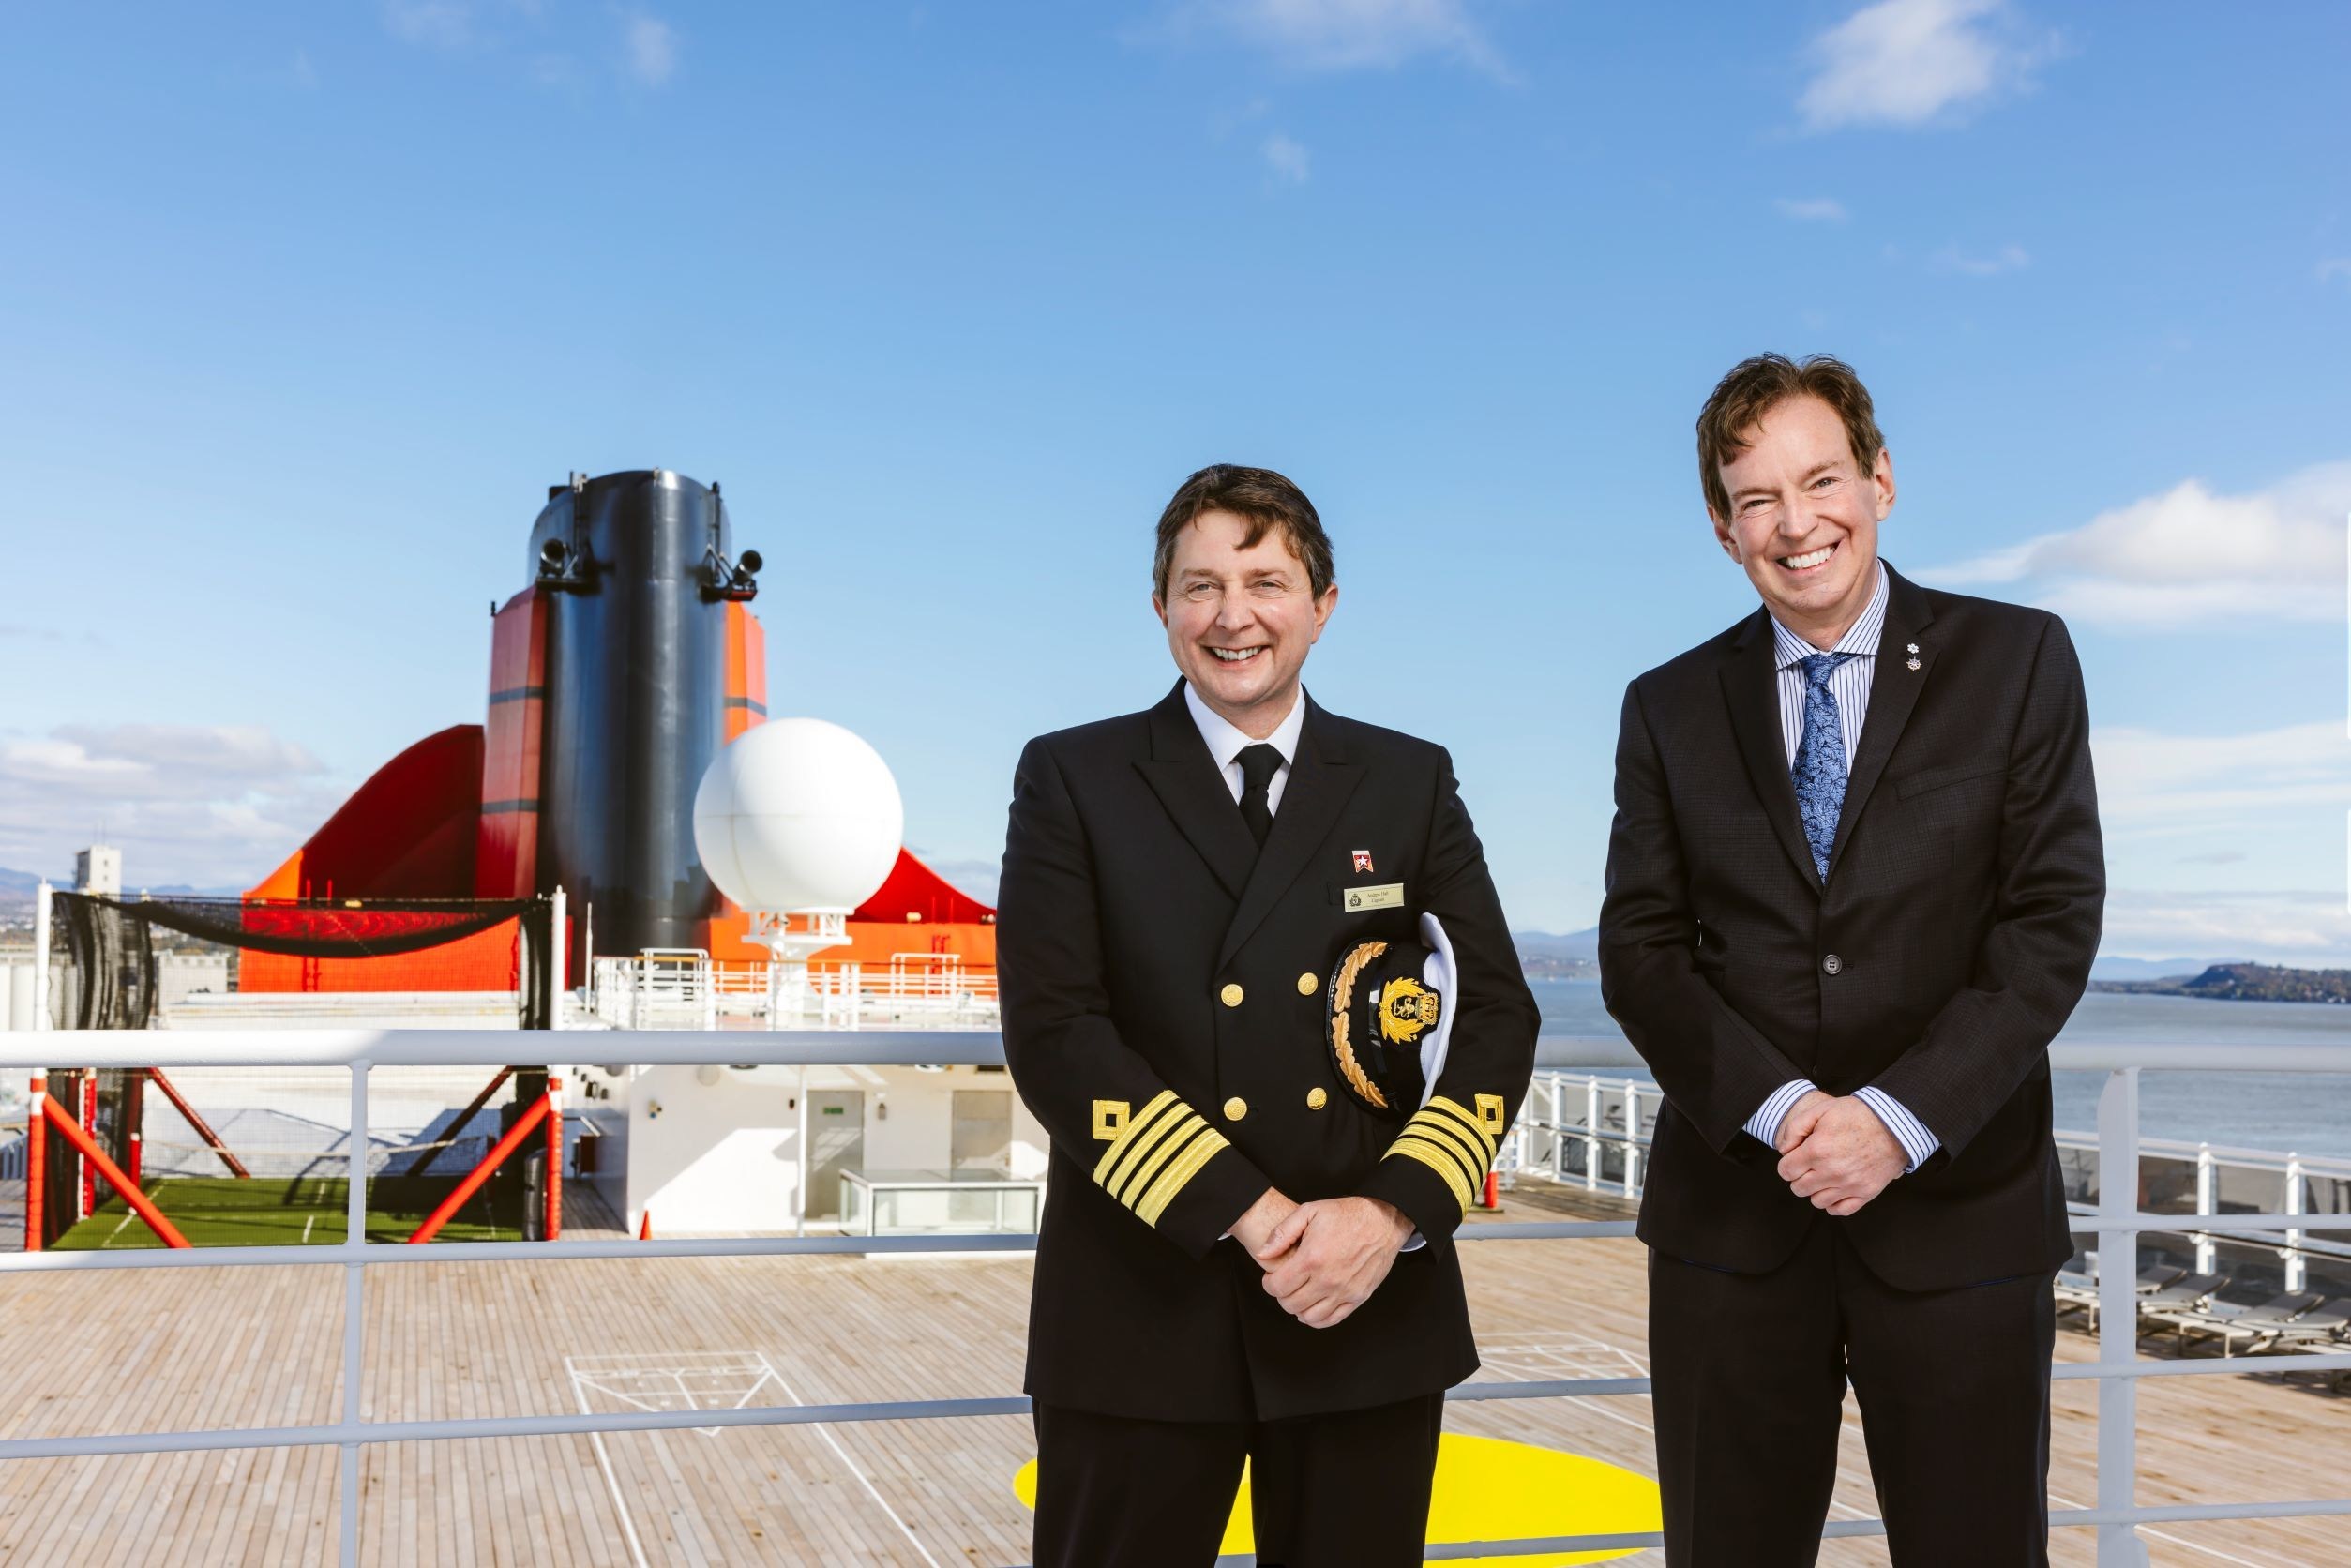 Cunard and the Royal Canadian Geographical Society Launch Historic New Partnership. RCGS Experts to Headline 2023 Voyages in Alaska and Canada / New England. Captain Andrew Hall, Master of Cunard flagship Queen Mary 2, and RCGS CEO John Geiger  (Image at LateCruiseNews.com - November 2022)